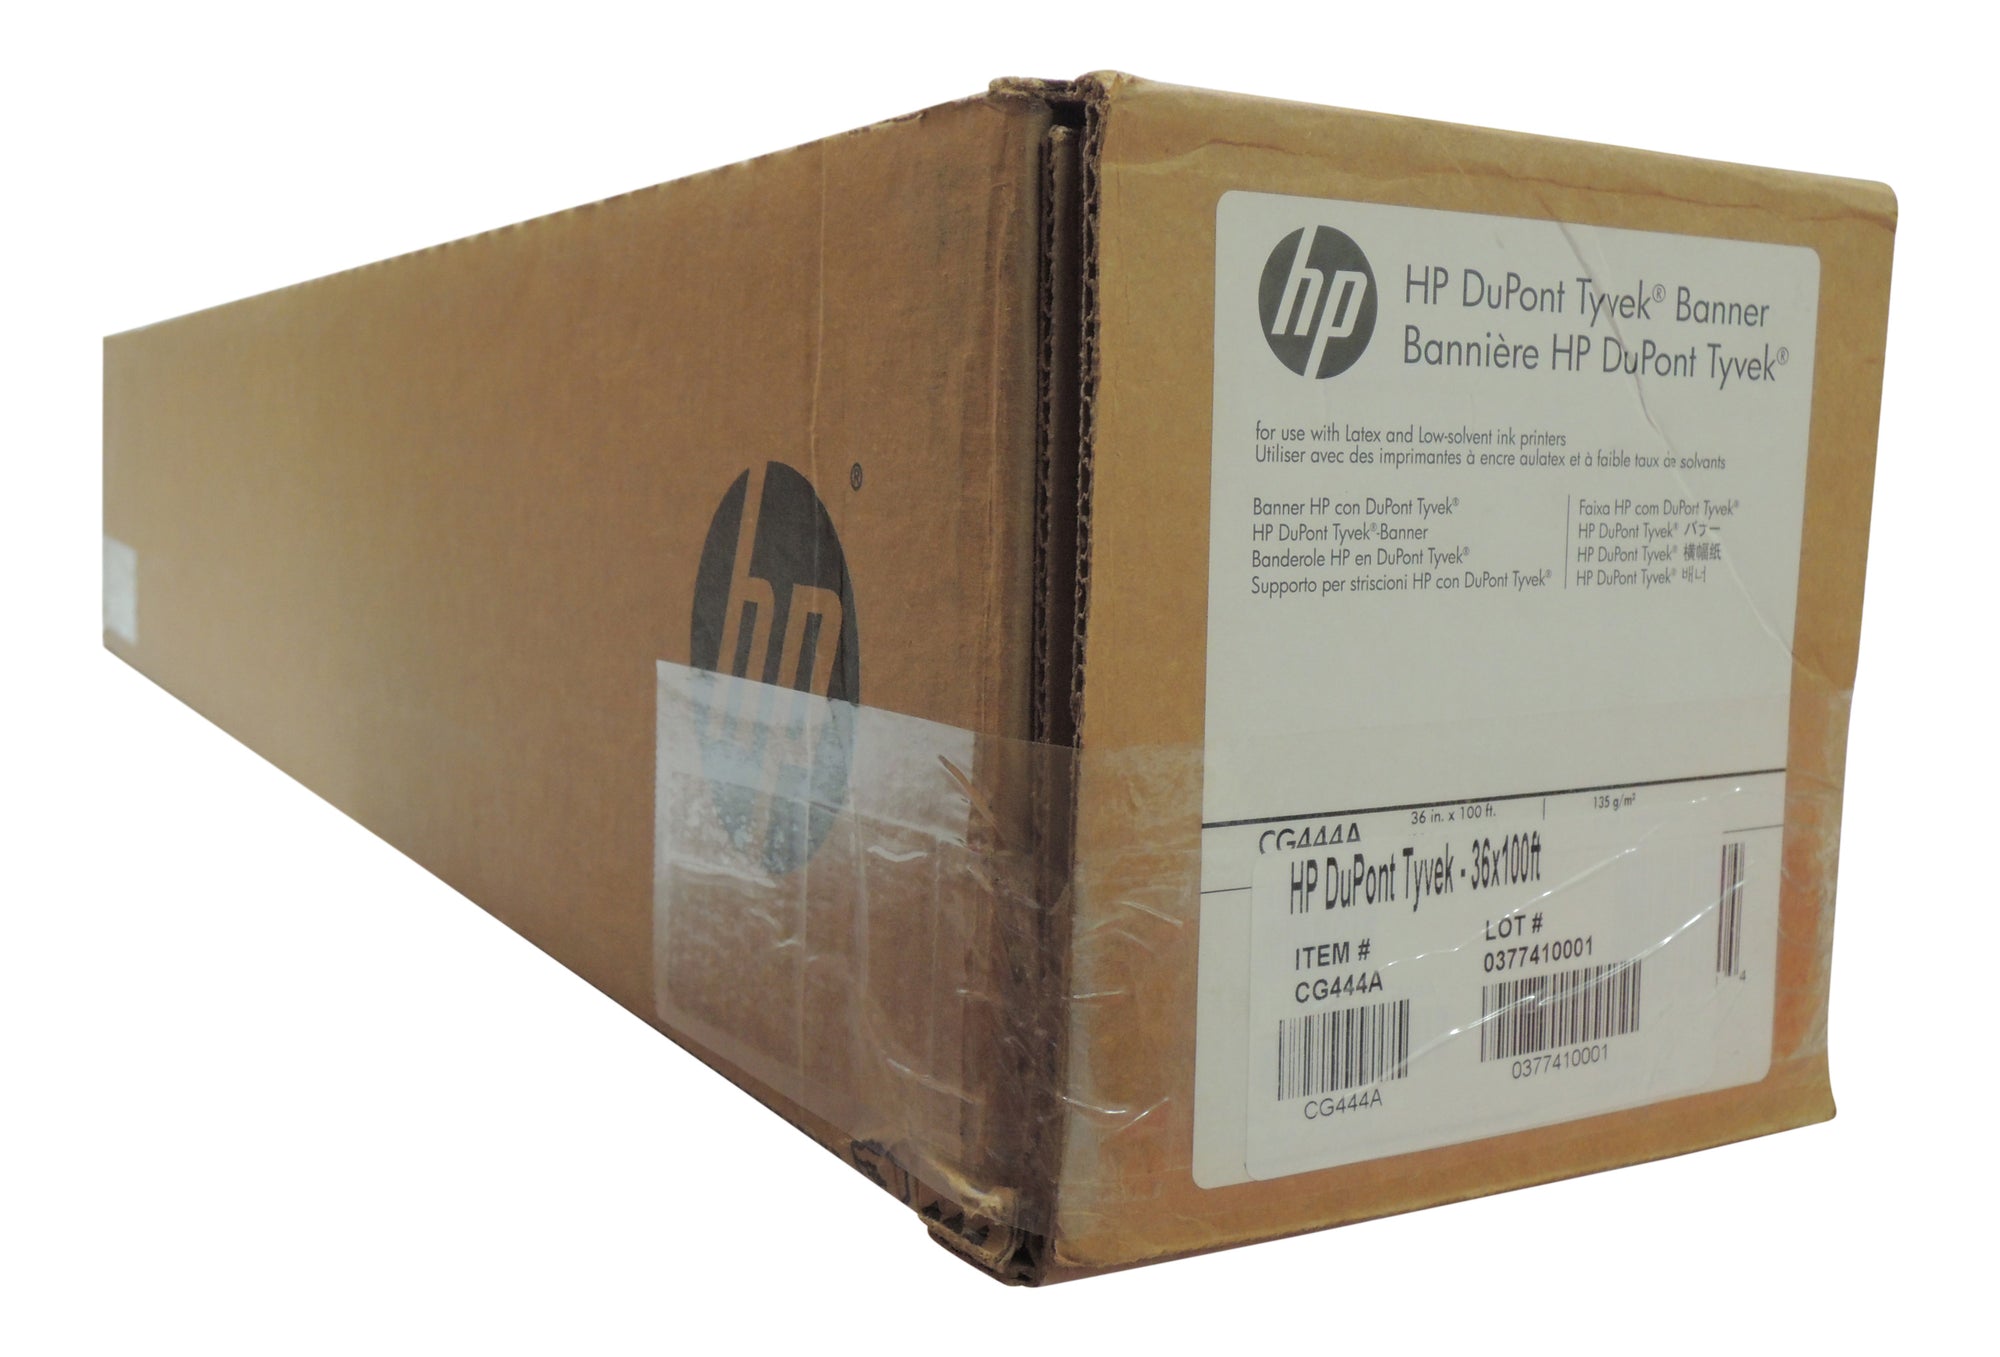 HP CG444A Dupont Tyvek 36 inch x 100 feet, 3" core, Latex compatible